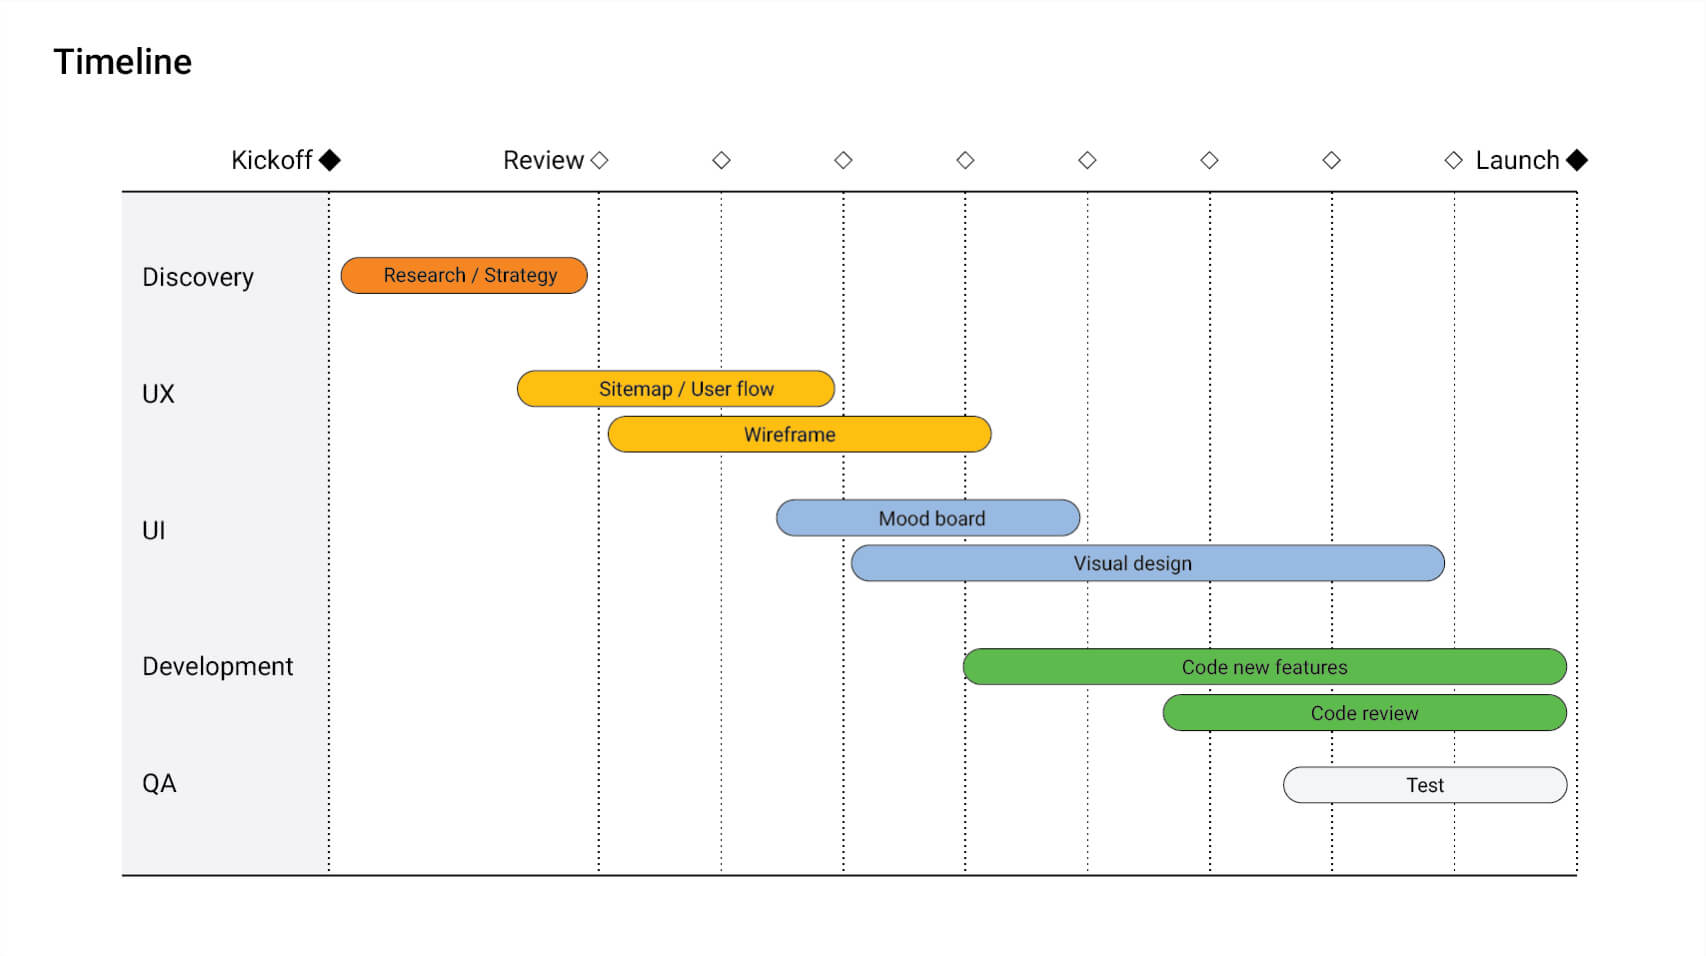 gantt chart showing delivery timelines across multiple practice areas